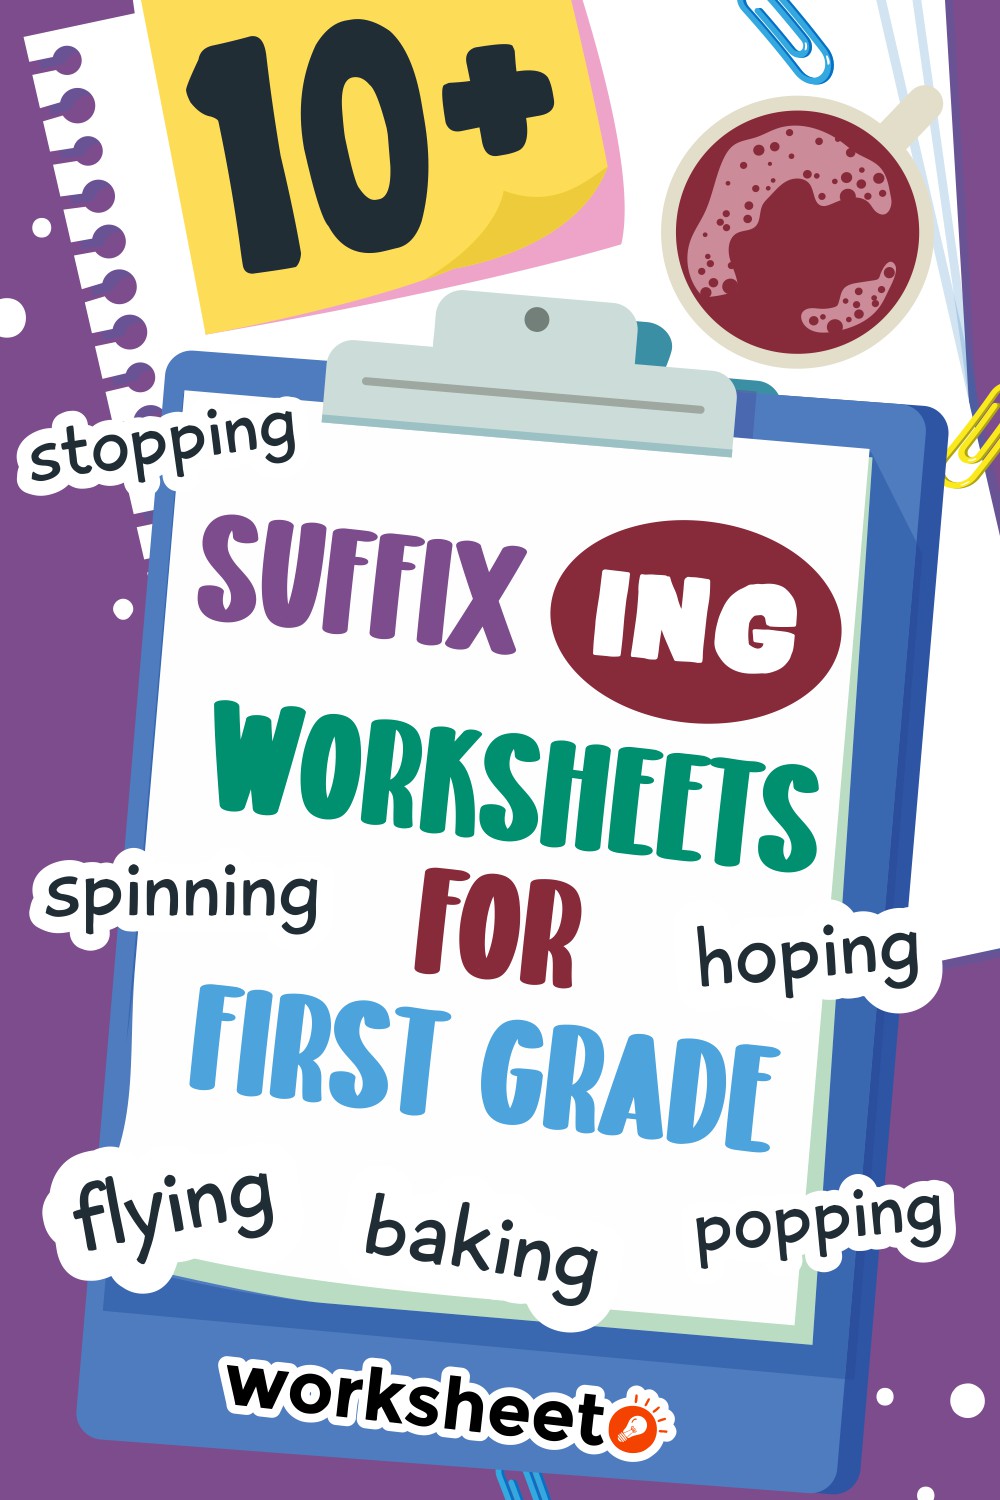 Suffix ING Worksheets for First Grade